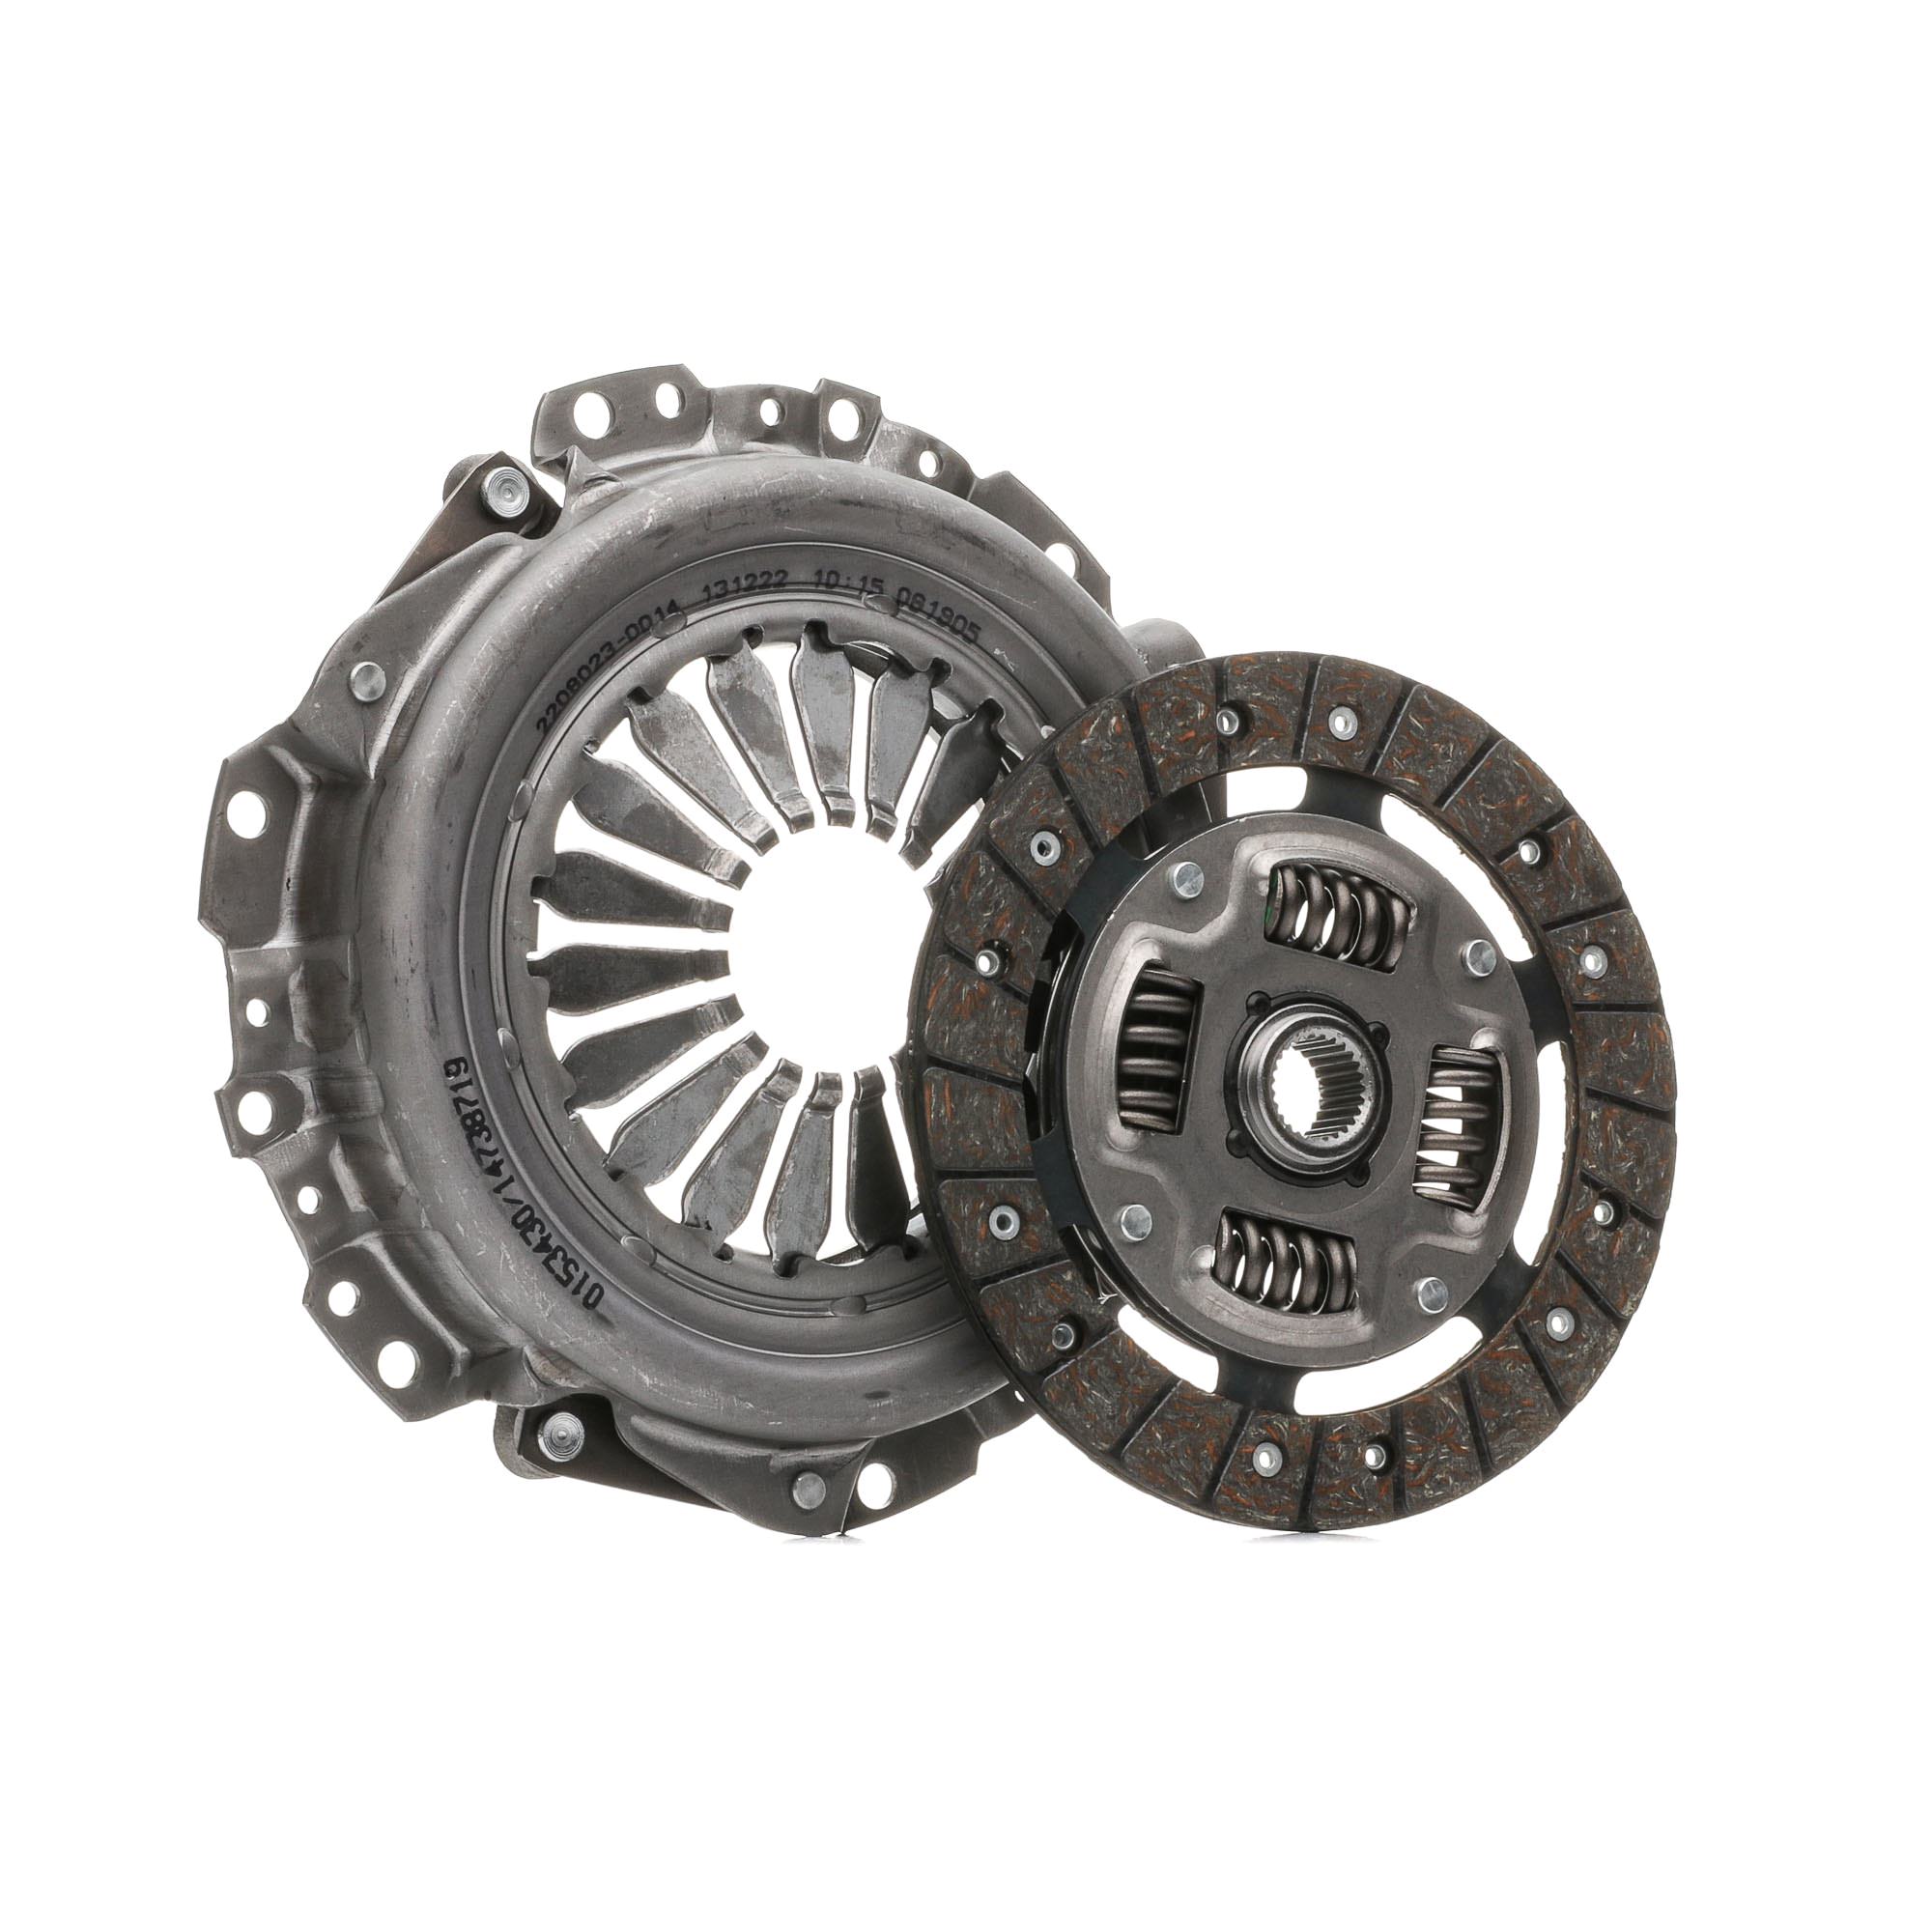 STARK SKCK-0100239 Clutch kit with clutch pressure plate, with clutch disc, without clutch release bearing, 190mm